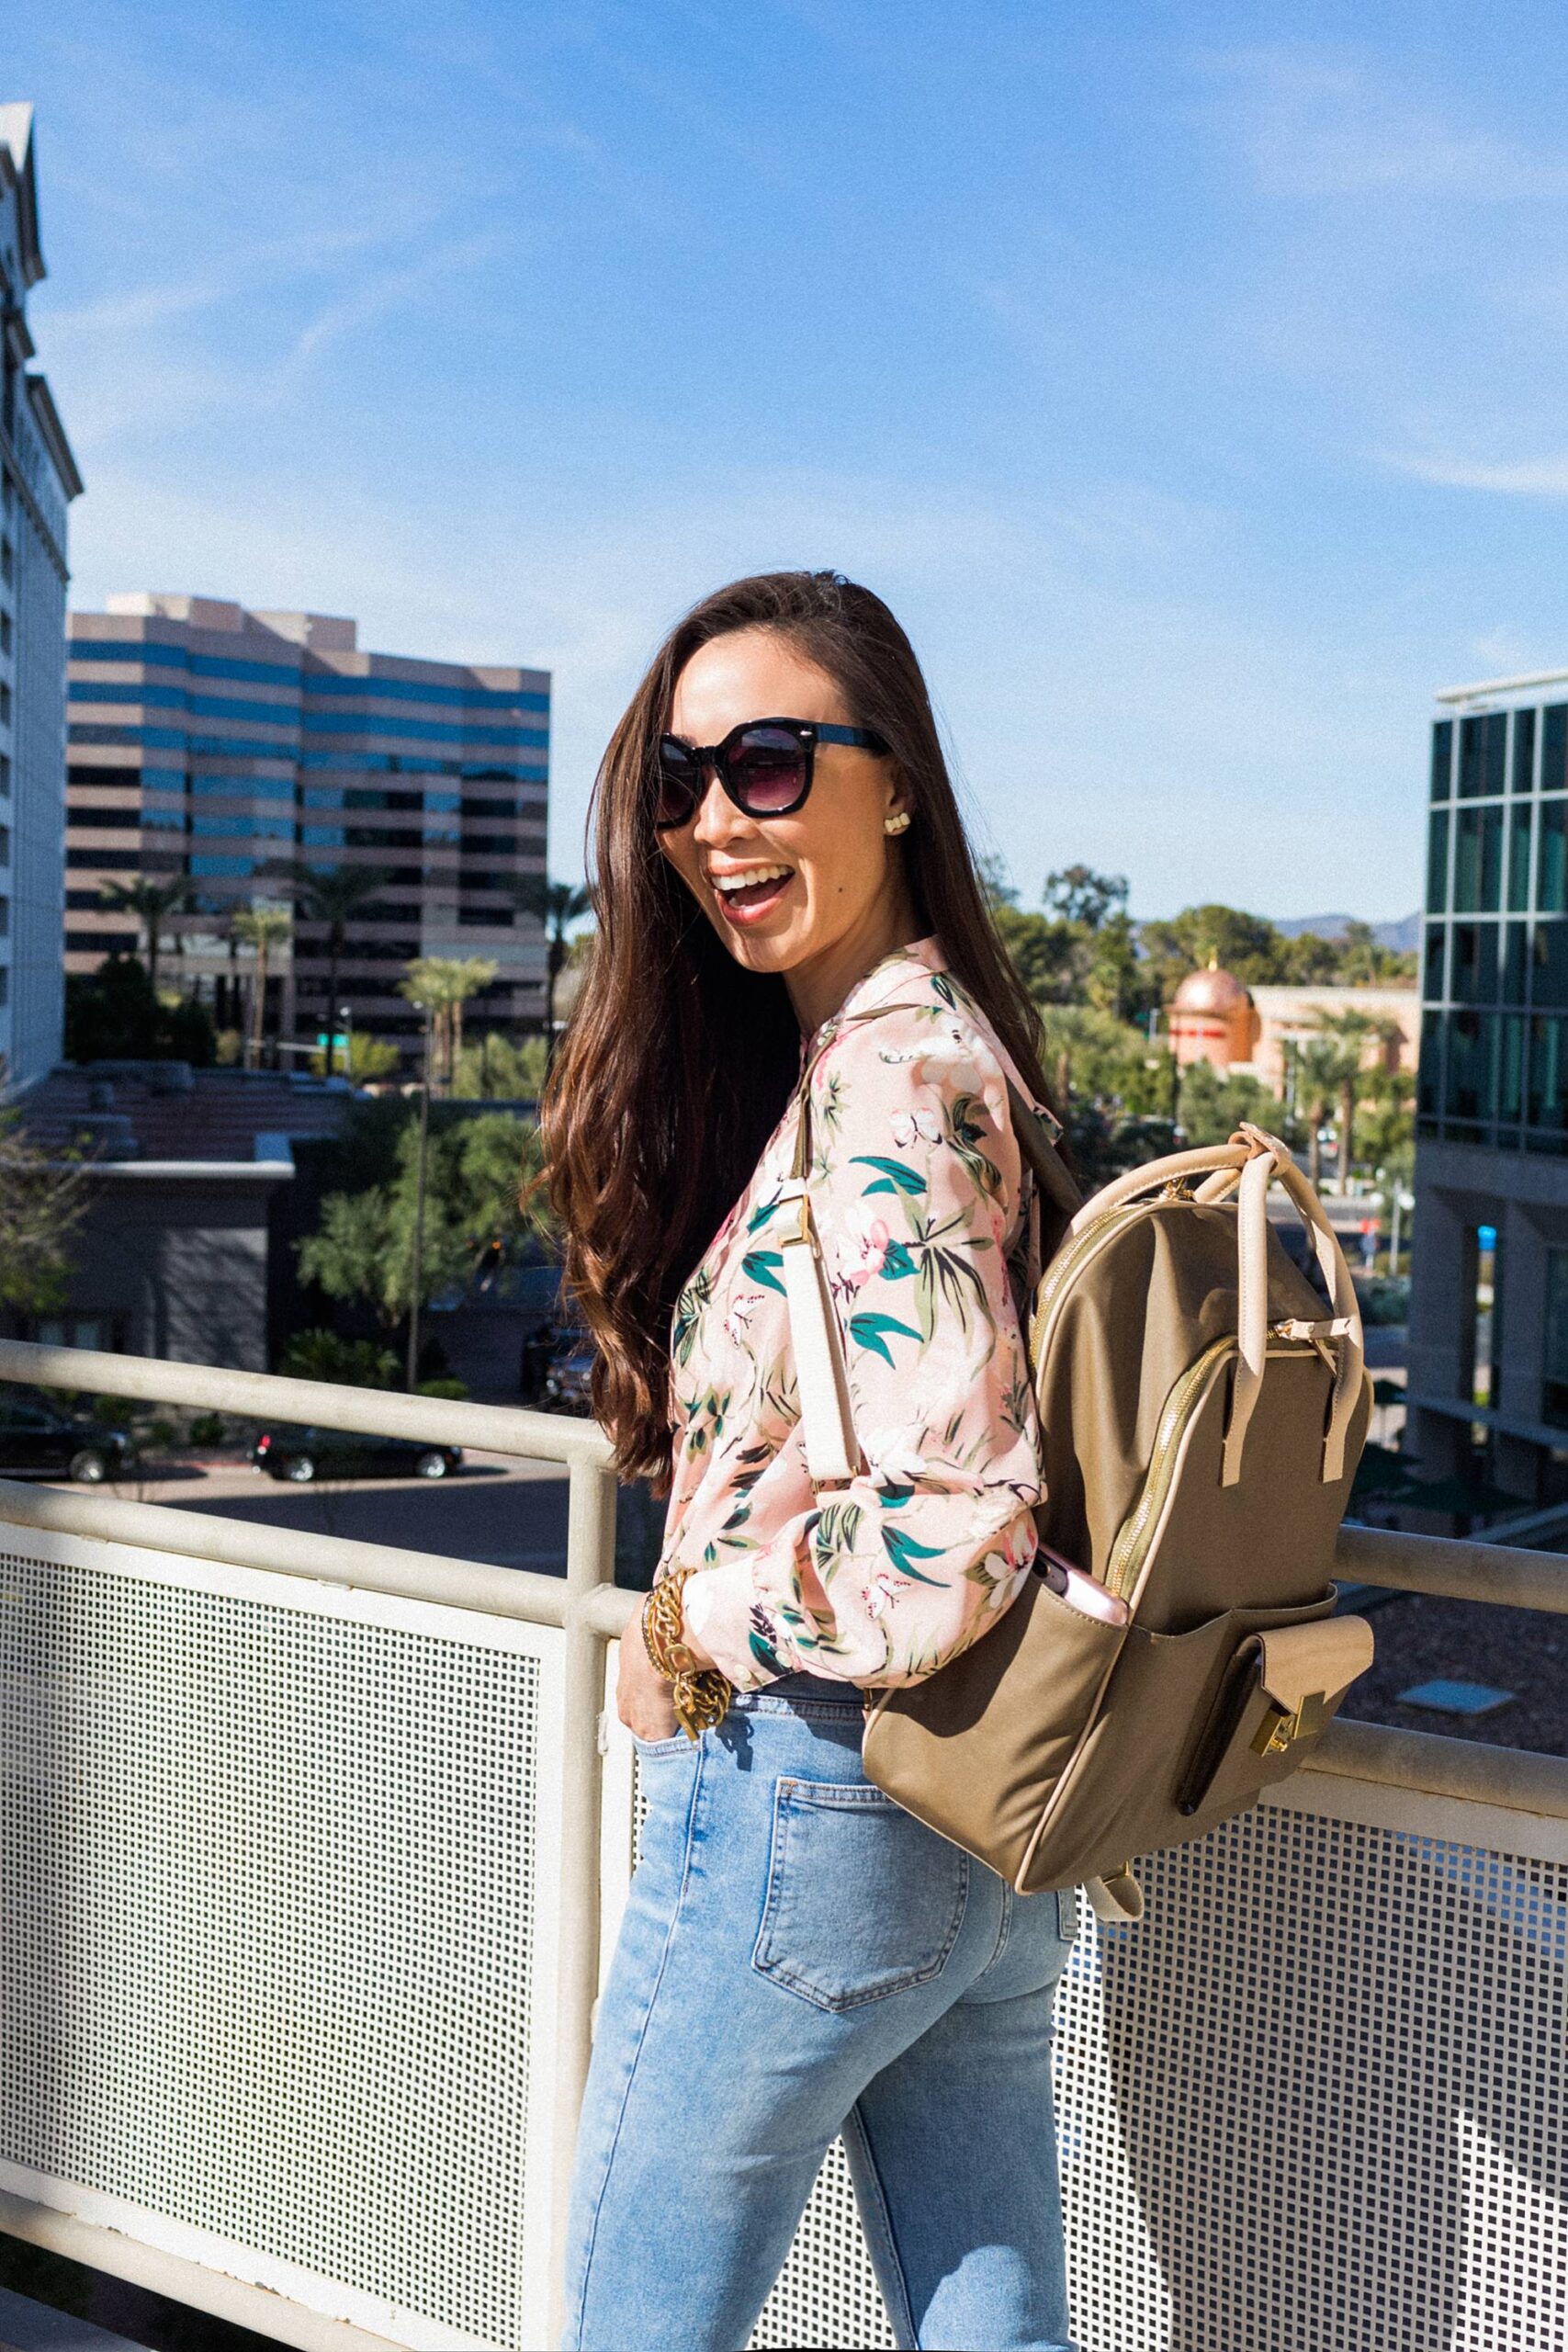 India Hicks Jet Pack backpack in army gray, gorgeous work bag can tuck in the straps. Lifestyle blogger Diana Elizabeth in Phoenix Arizona wearing Kate Spade